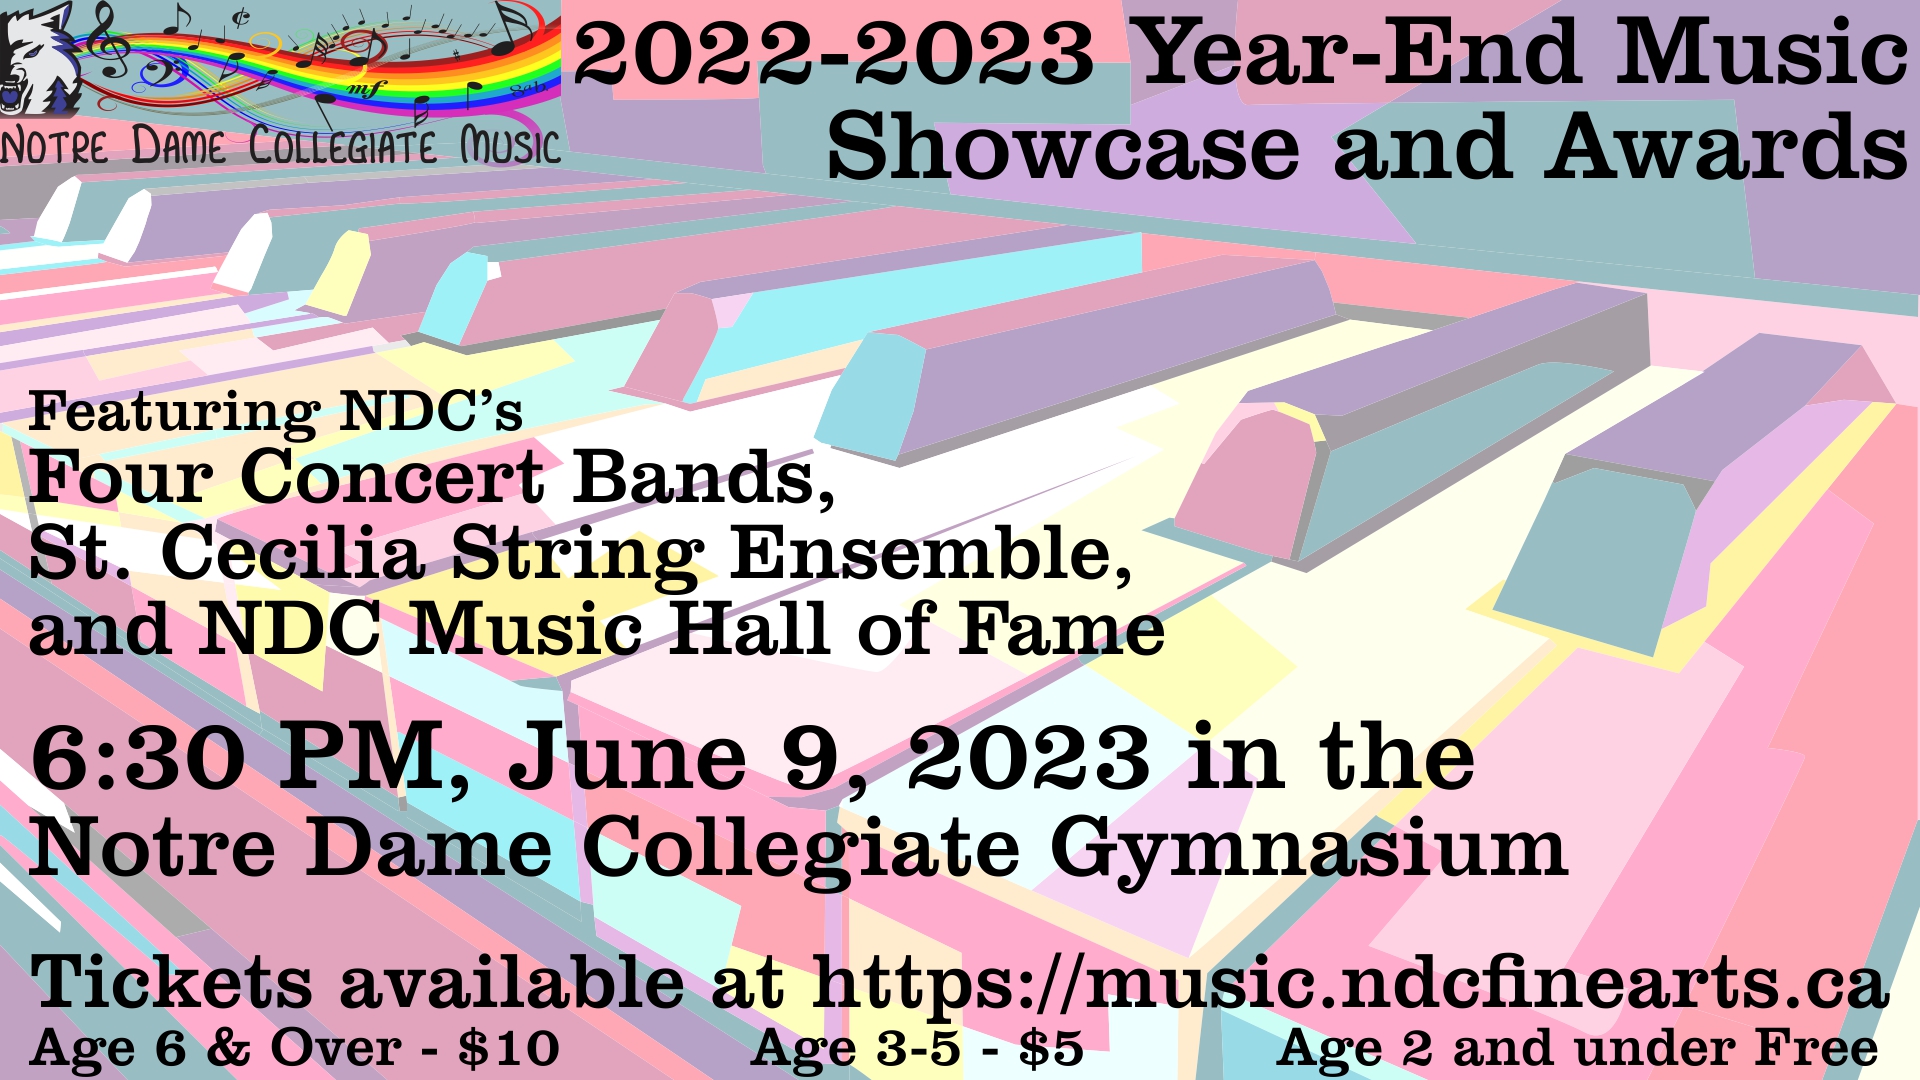 2022-2023 Year-End Music Showcase and Awards